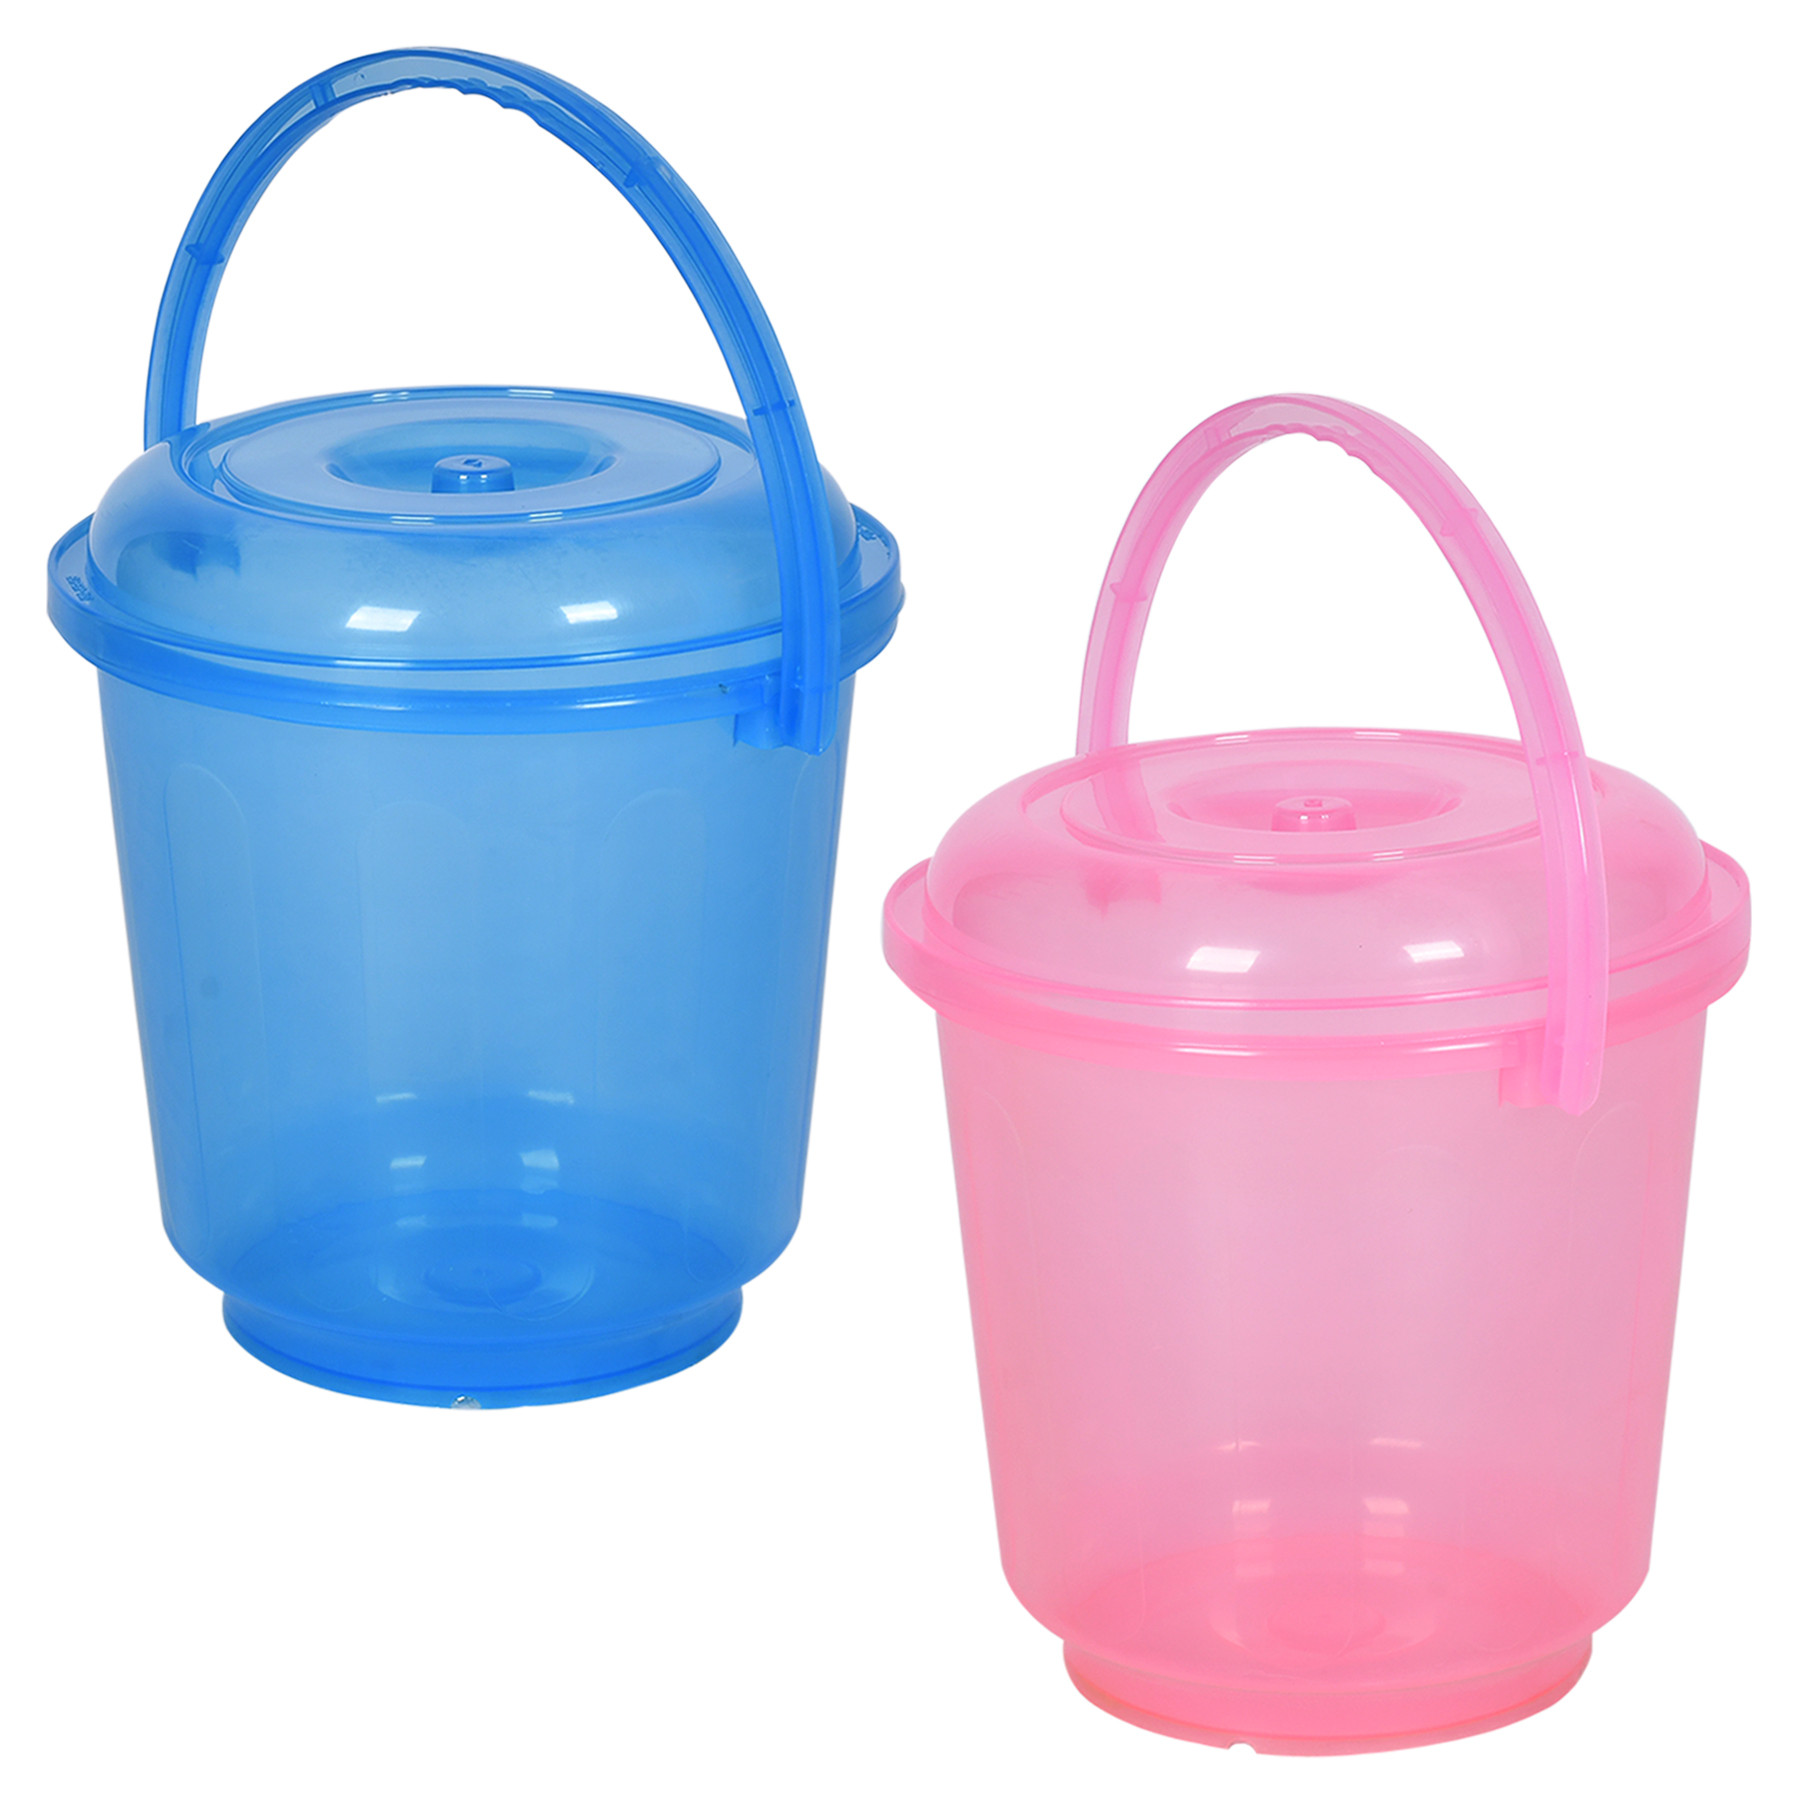 Kuber Industries Bucket | Bathroom Bucket | Utility Bucket for Daily Use | Water Storage Bucket | Bathing Bucket with Handle & Lid | 13 LTR | SUPER-013 | Transparent | Blue & Pink